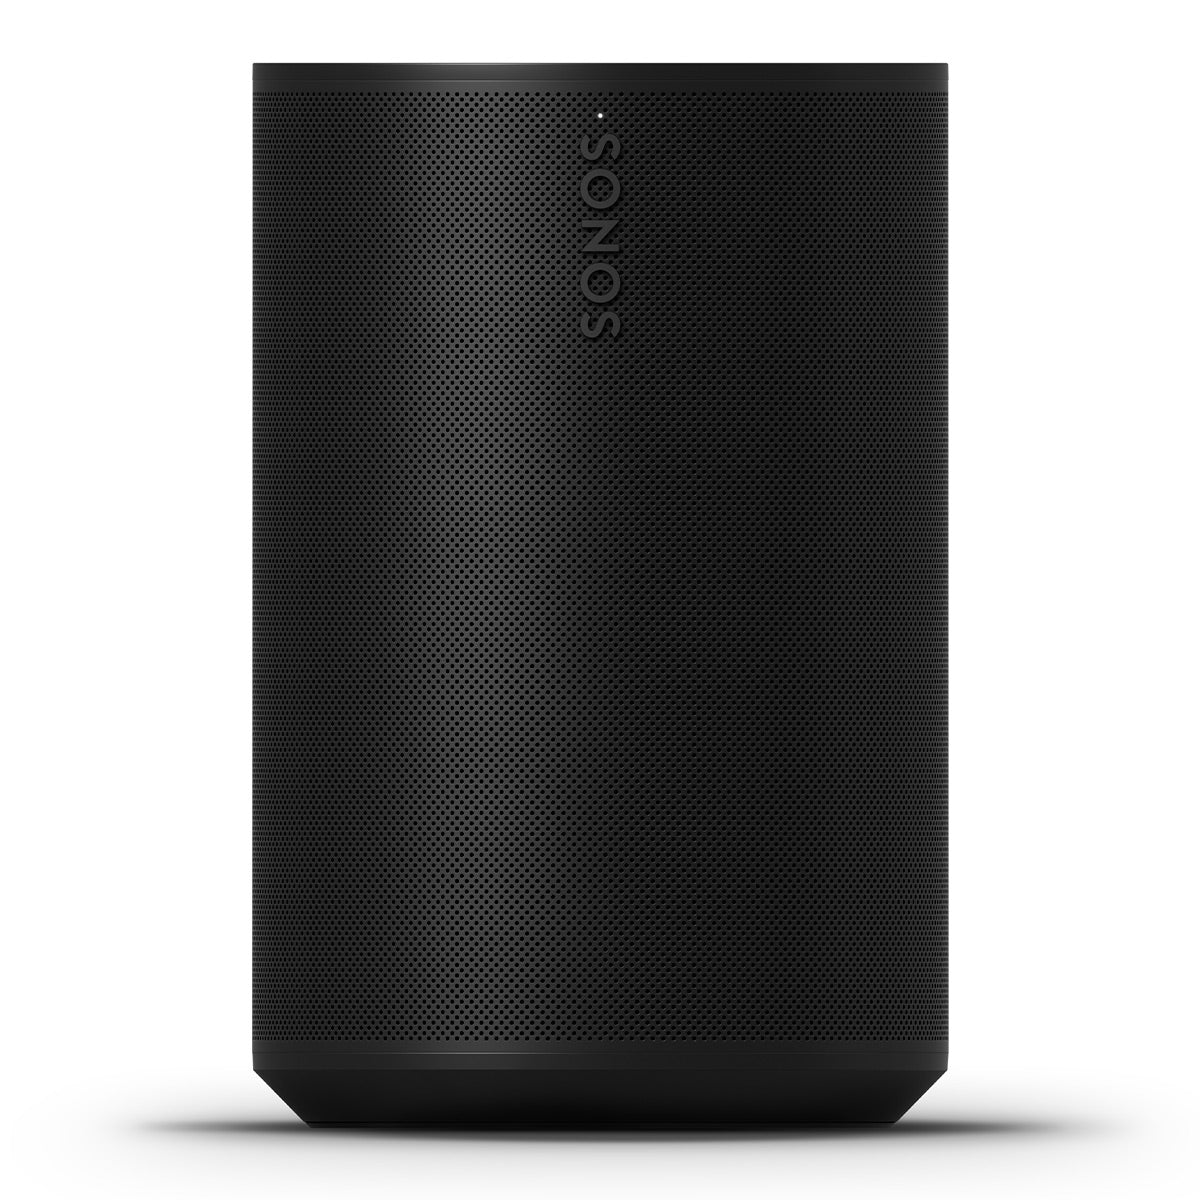 Sonos Era 100 Voice-Controlled Wireless Smart Speakers with Bluetooth, Trueplay Acoustic Tuning Technology, & Amazon Alexa Built-In - Pair (Black)